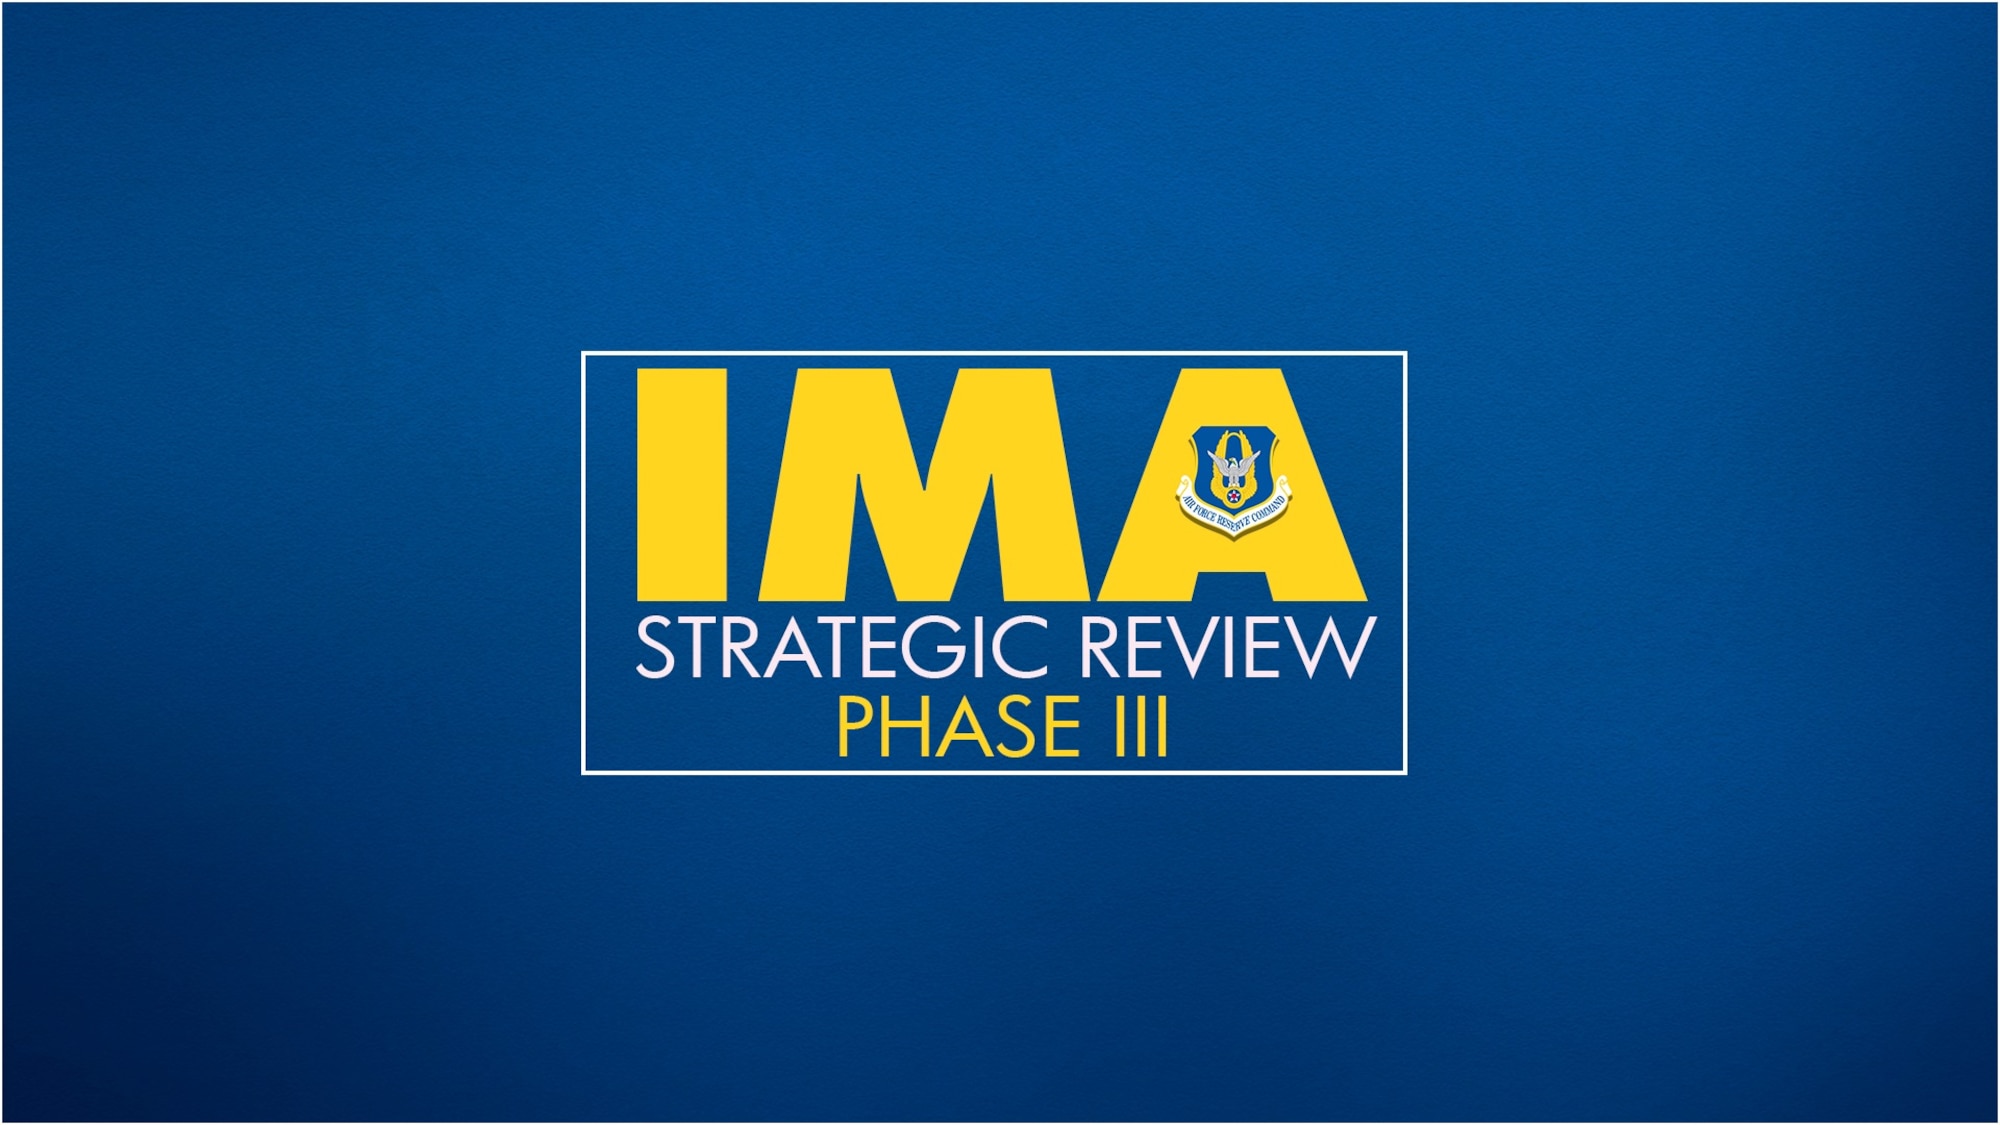 Phase III of the IMA Strategic Review is currently under way.